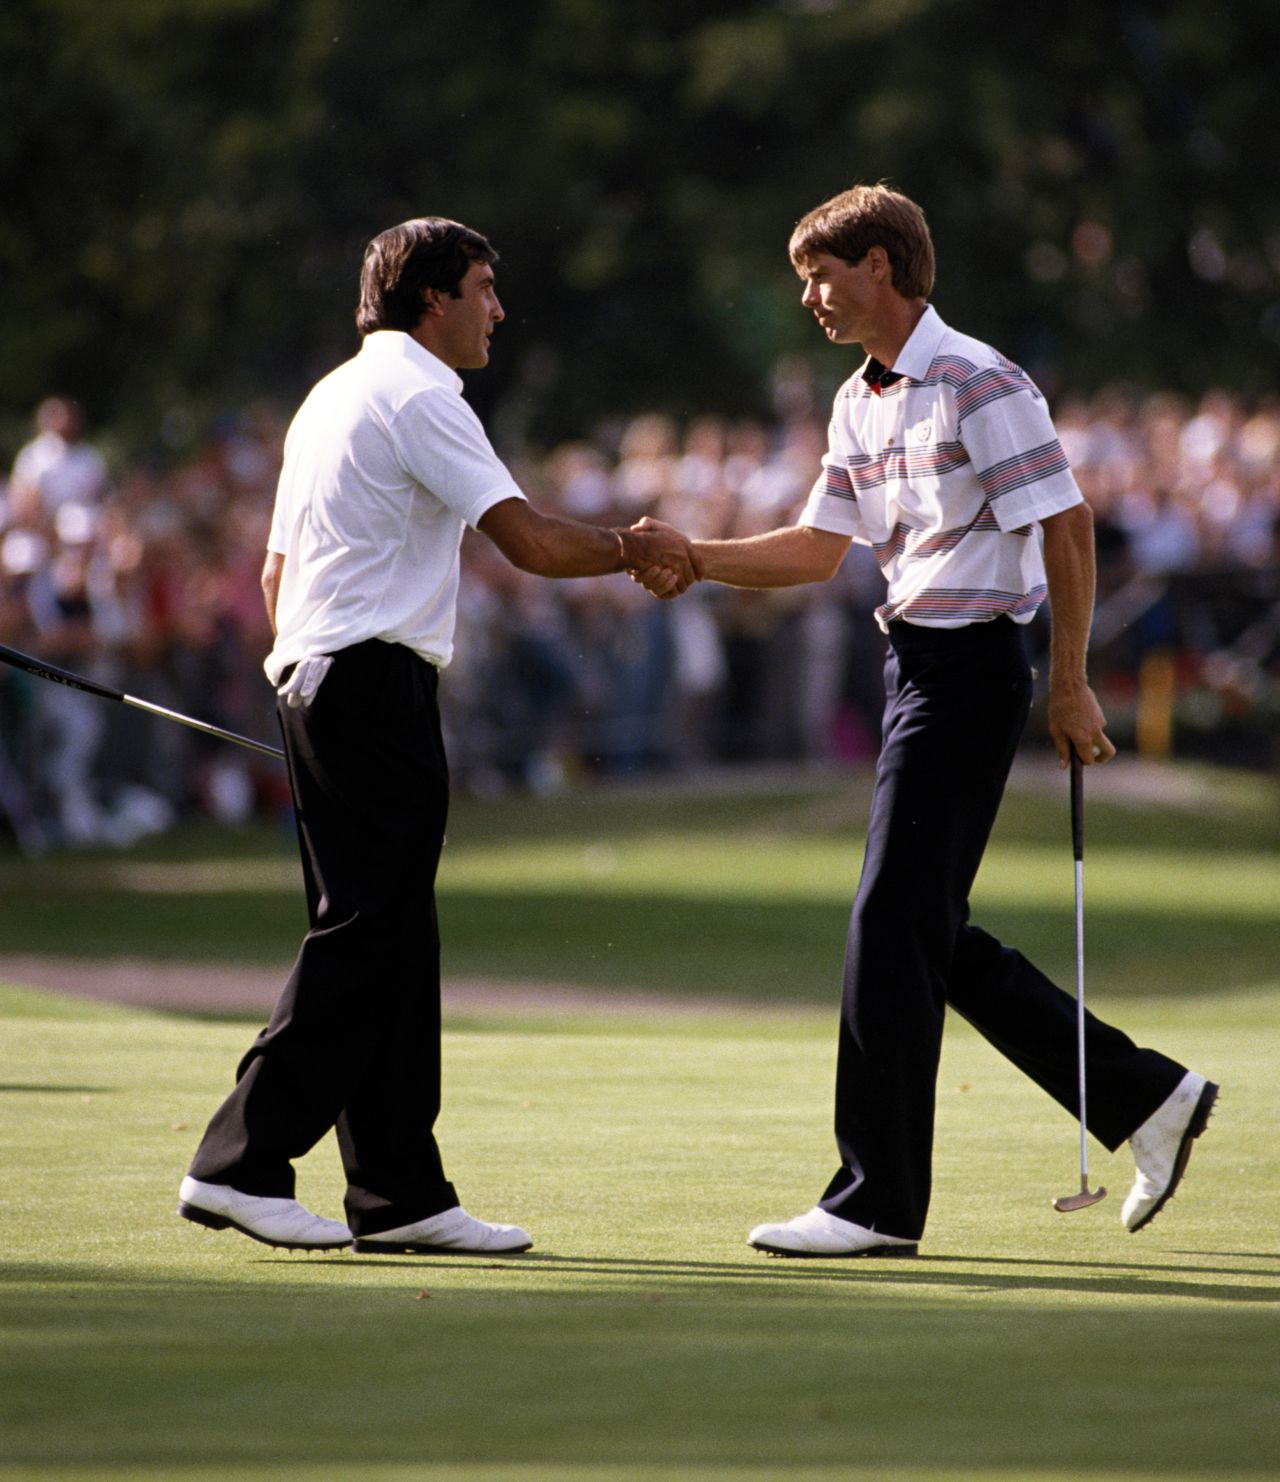 The rivalry between Paul Azinger and Seve Ballesteros was primarily played out at  Ryder Cup. At the 1989 Ryder Cup, Azinger refused to let Ballesteros switch out a scuffed ball in their singles match. On the 18th hole of that match, Ballesteros then disputed a drop Azinger took out of the water. In 1991, when the two were put together in the opening match, the pair clashed along with their teammates after the Americans had apparently used two different balls illegally. "The Americans were 11 nice guys -- and Paul Azinger," Ballesteros memorably later said.